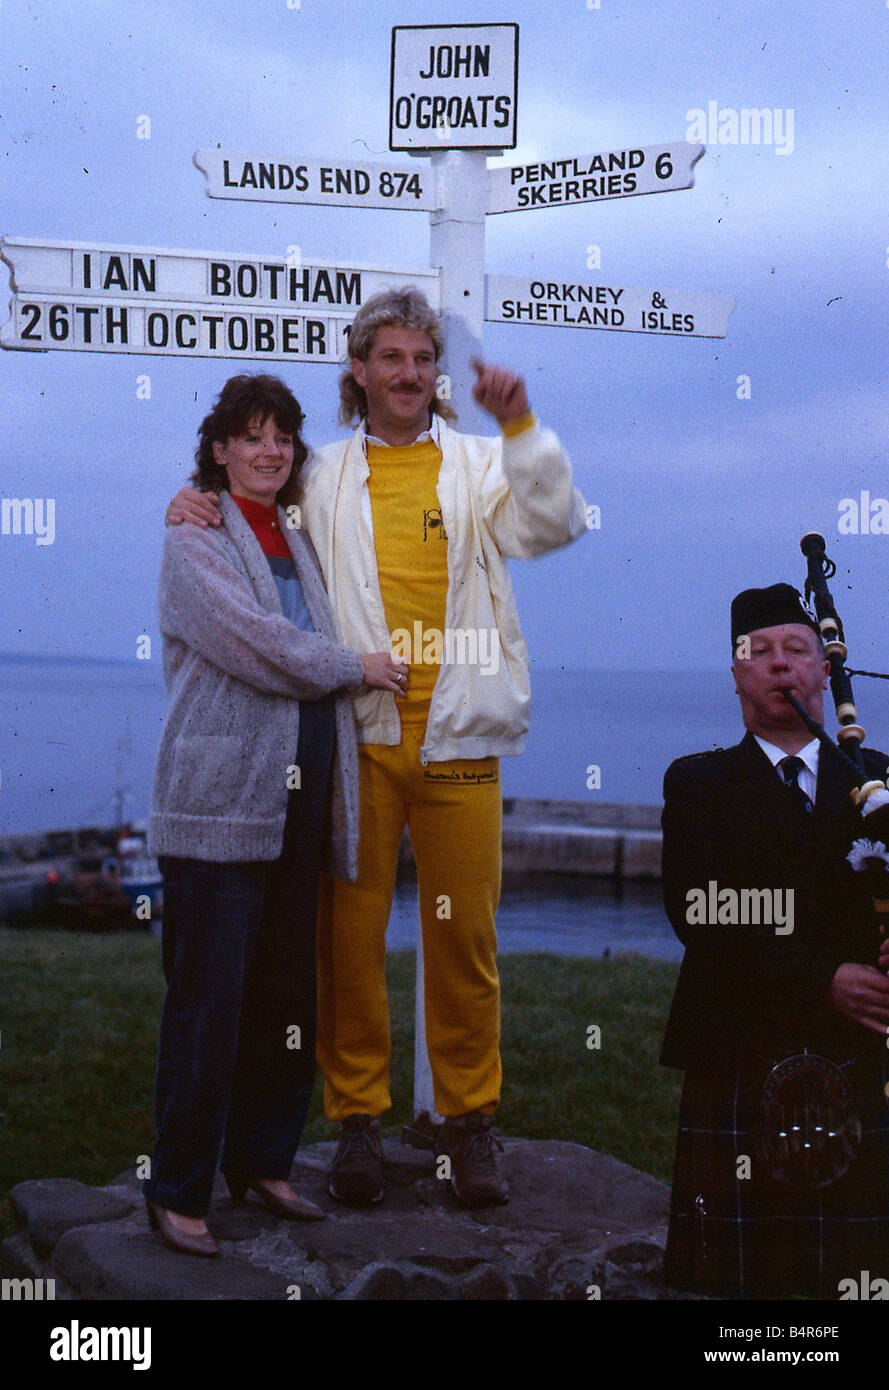 Ian Botham cricketer October 1985 With wife at John O Groats sign post piper Stock Photo